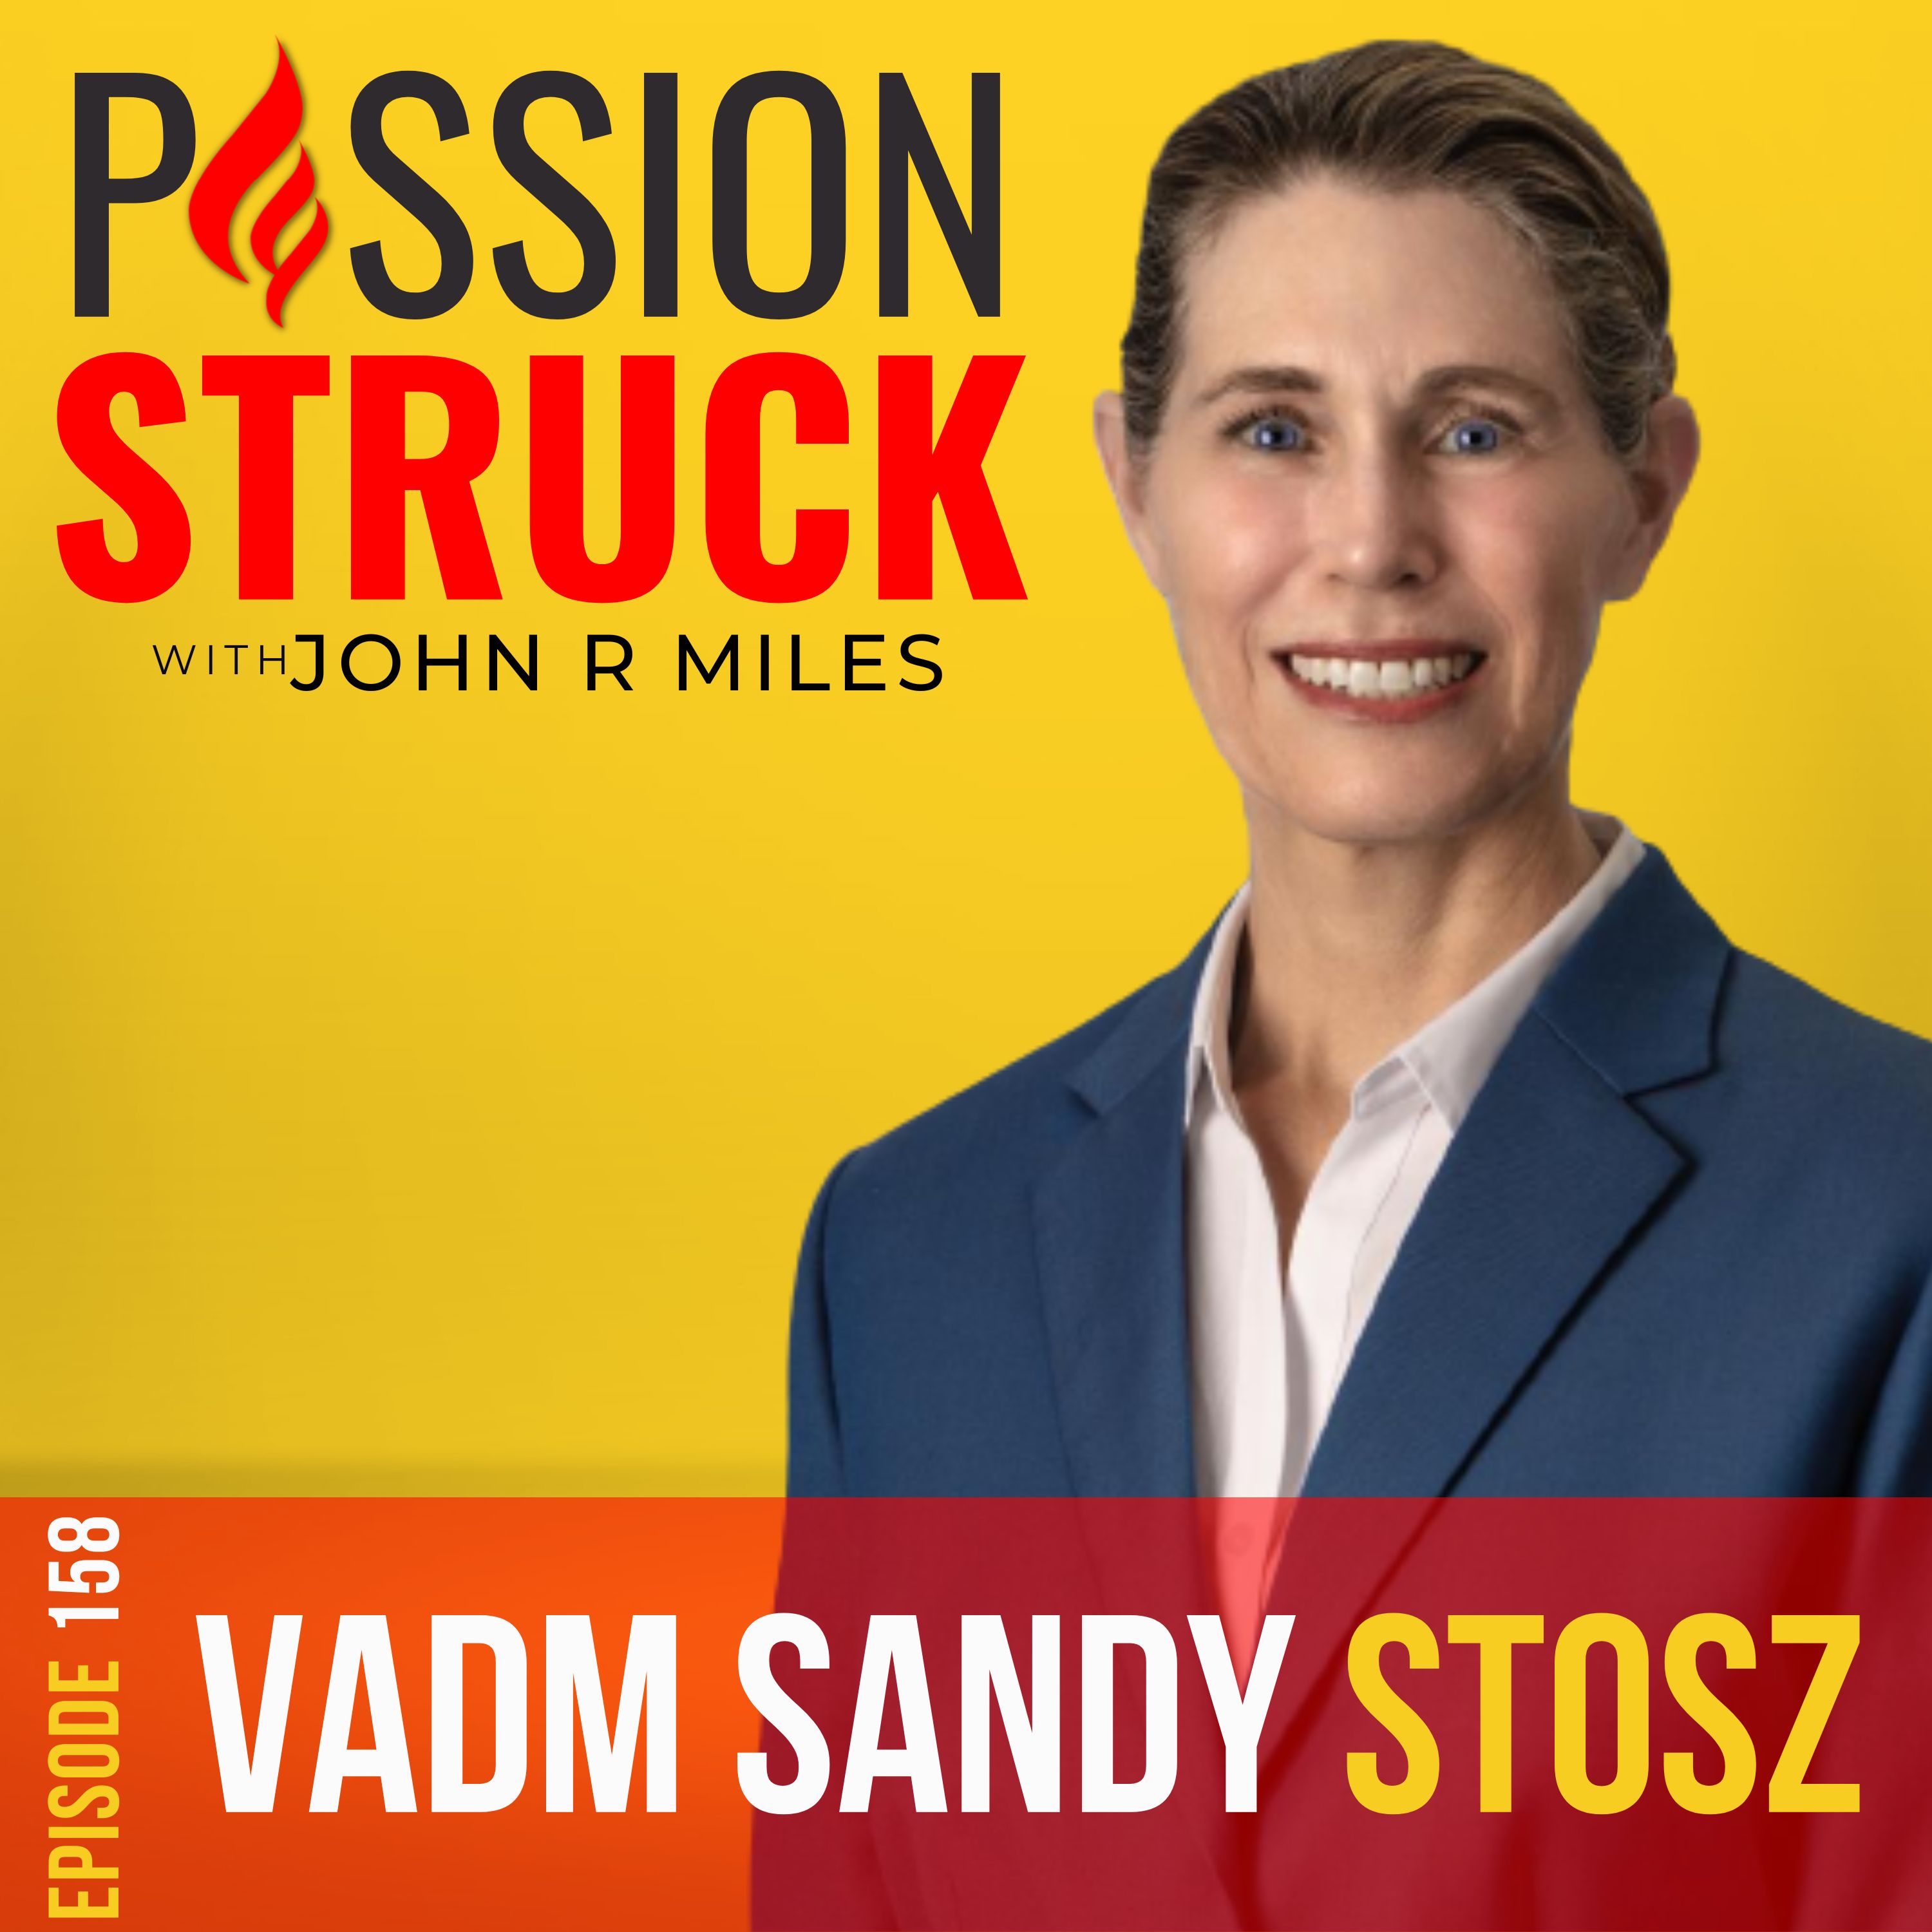 Passion Struck podcast album cover episode 159 with Vice Admiral Sandy Stosz on how to become a leader with moral courage